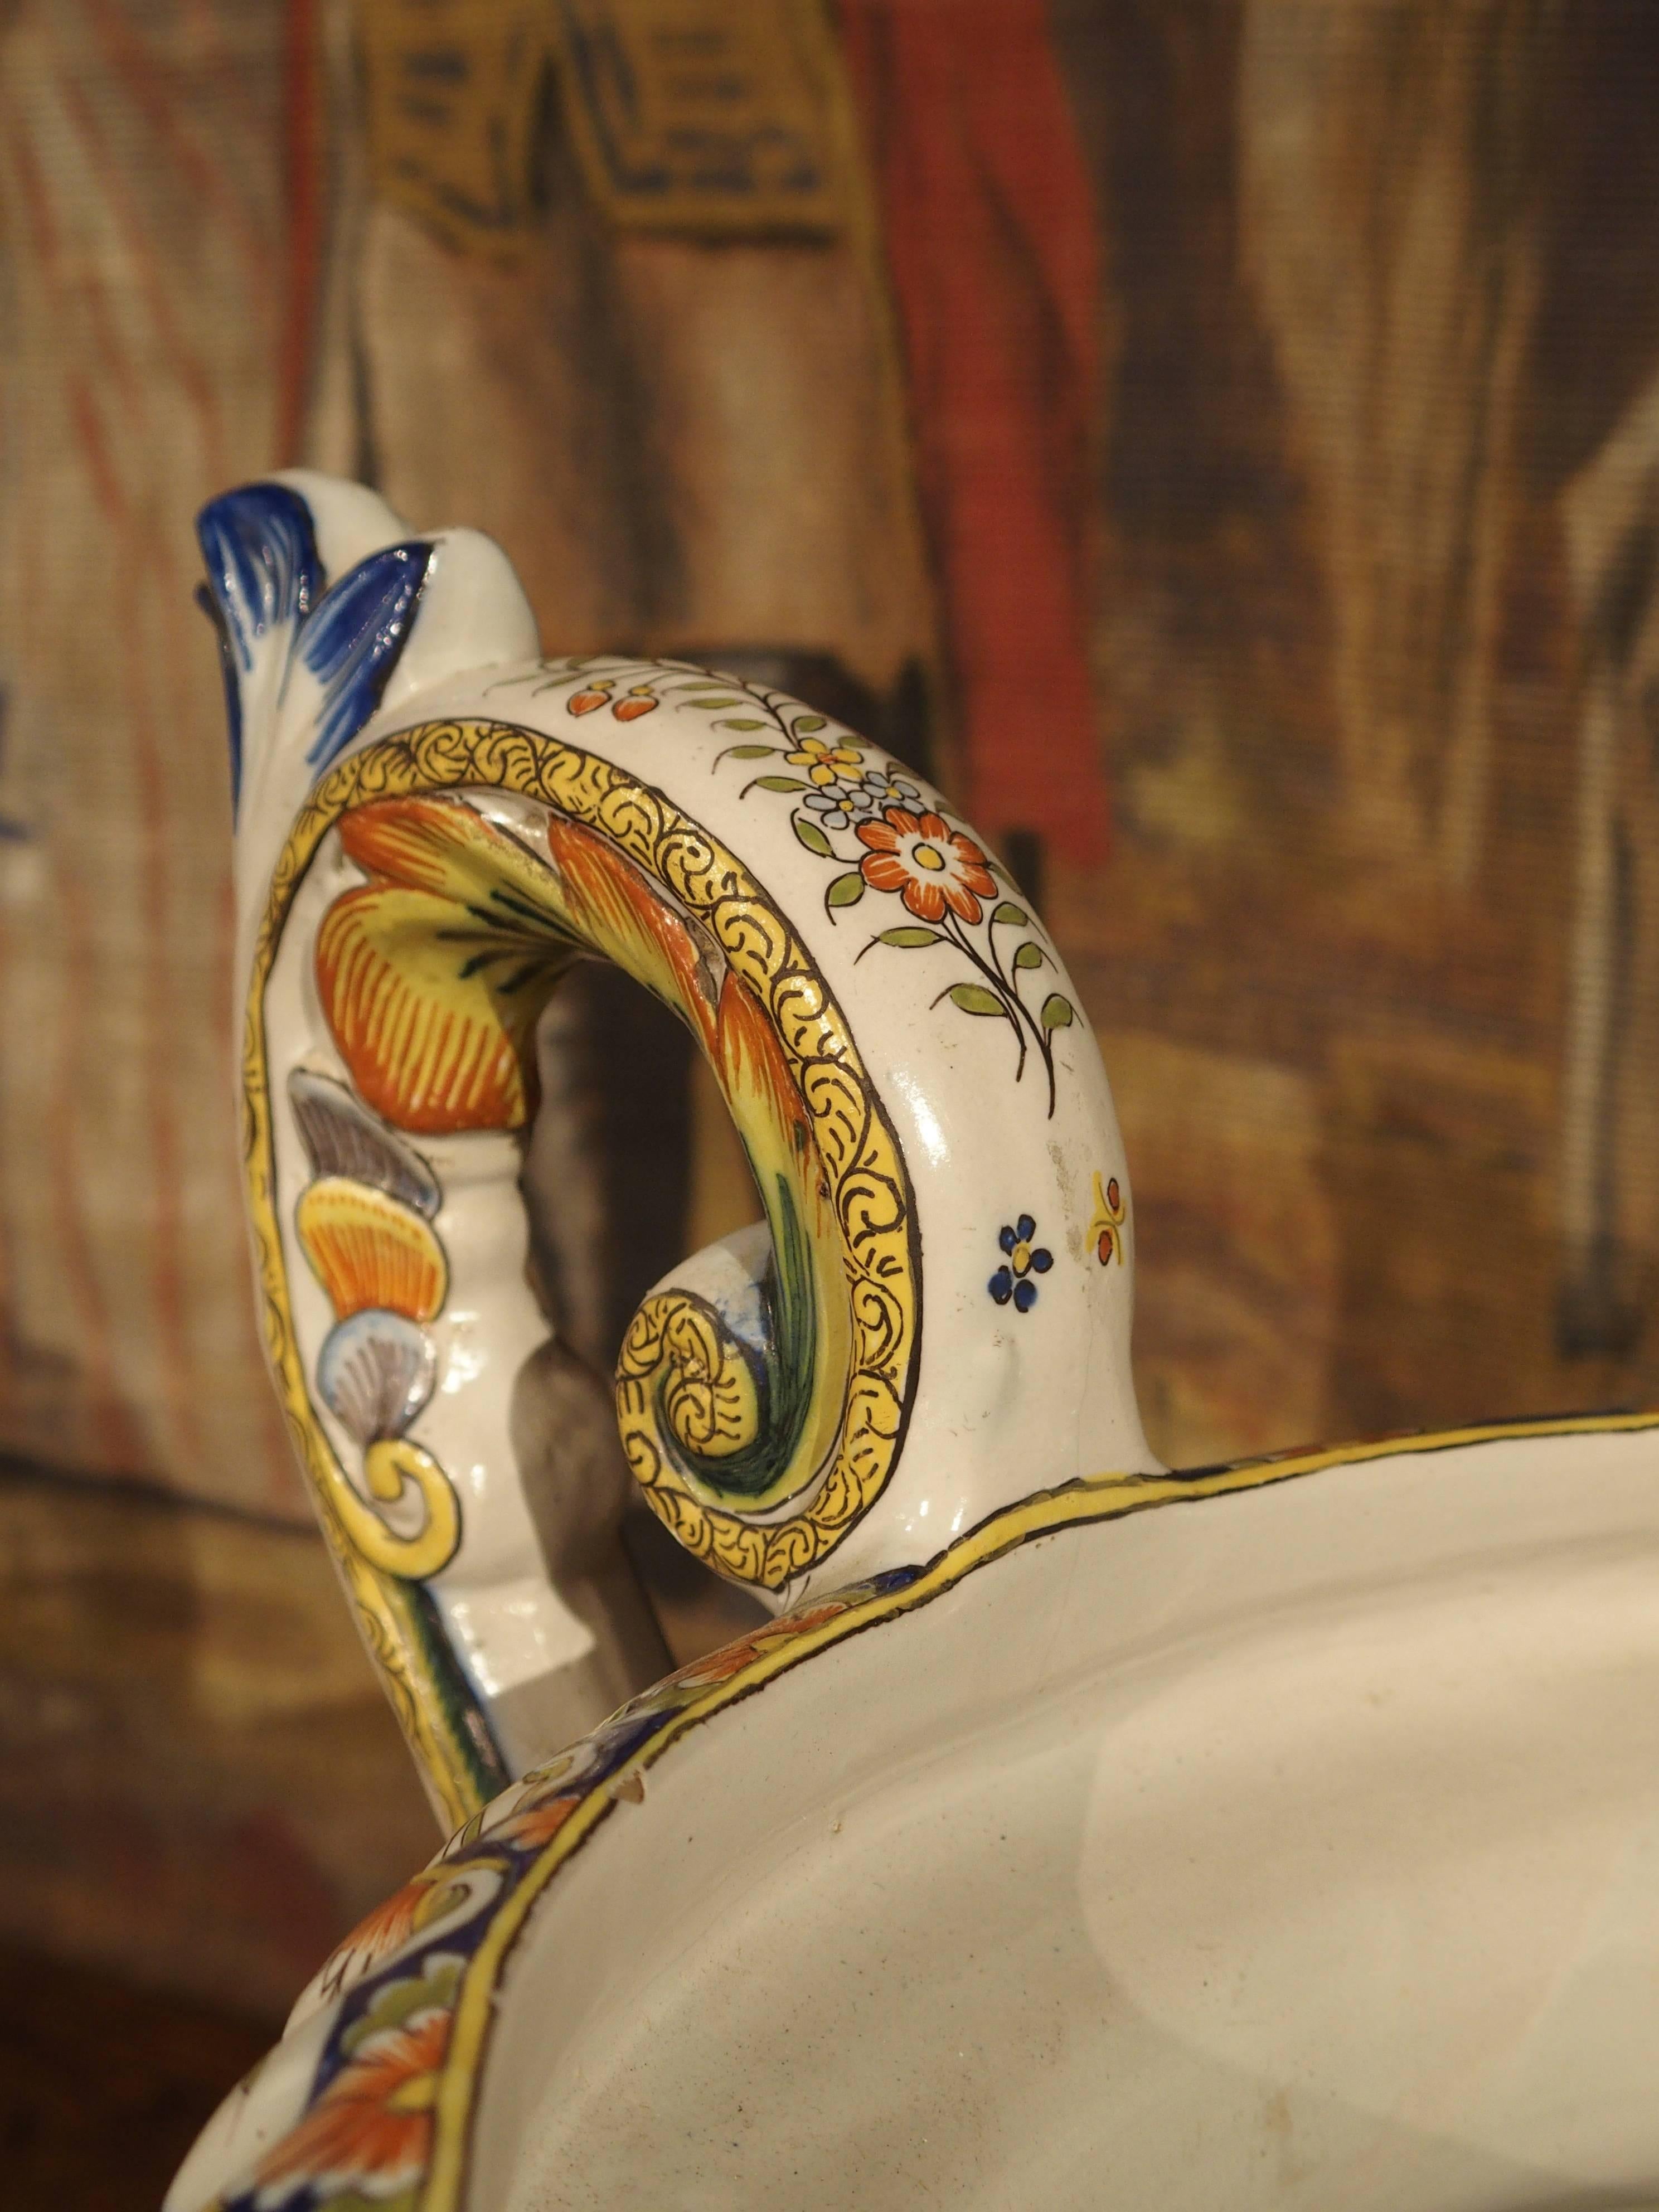 This antique French faience urn has been hand-painted with very fine detail in all of its motifs. It is from the Desvres region of France. The rim has a cobalt blue ground with white insets. Orange, yellow and light olive green flowers and foliage